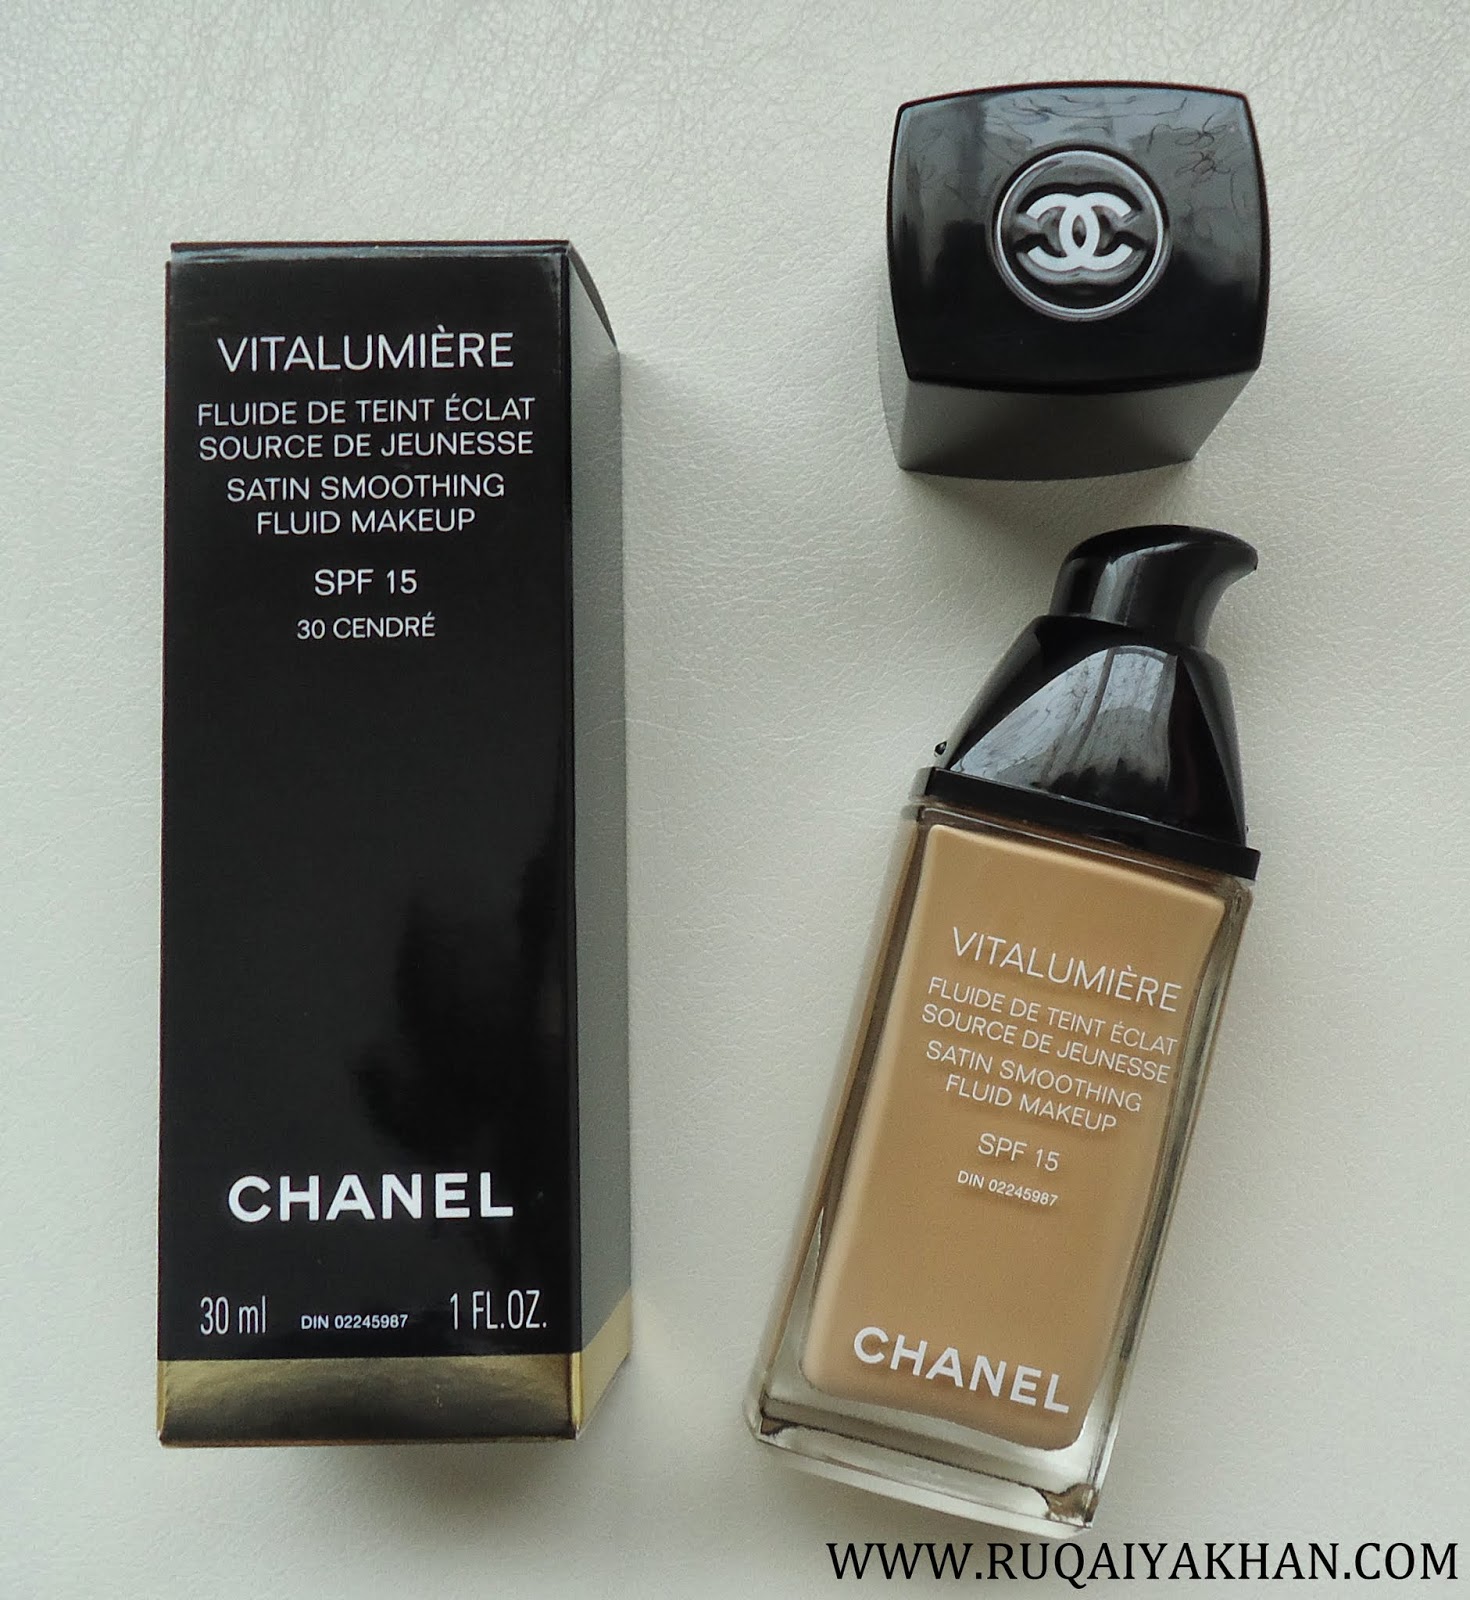 CHANEL+Vitalumiere+Satin+Smoothing+Fluid+Make+up+Spf15+20+Clair+